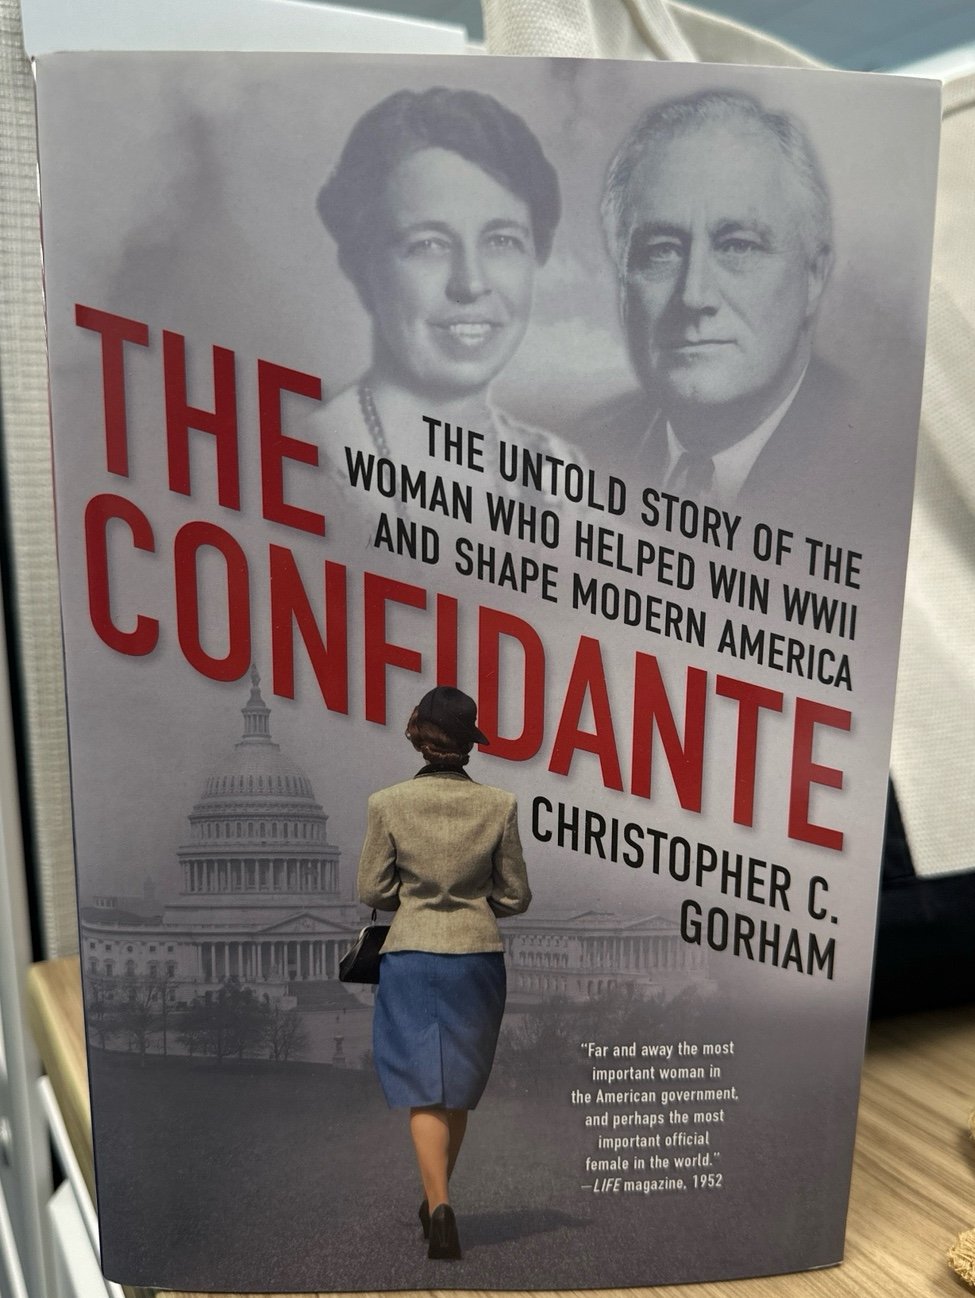 The Confidante: The Untold Story of the Woman Who Helped Win WWII and Shape Mode lCQh1HrM0